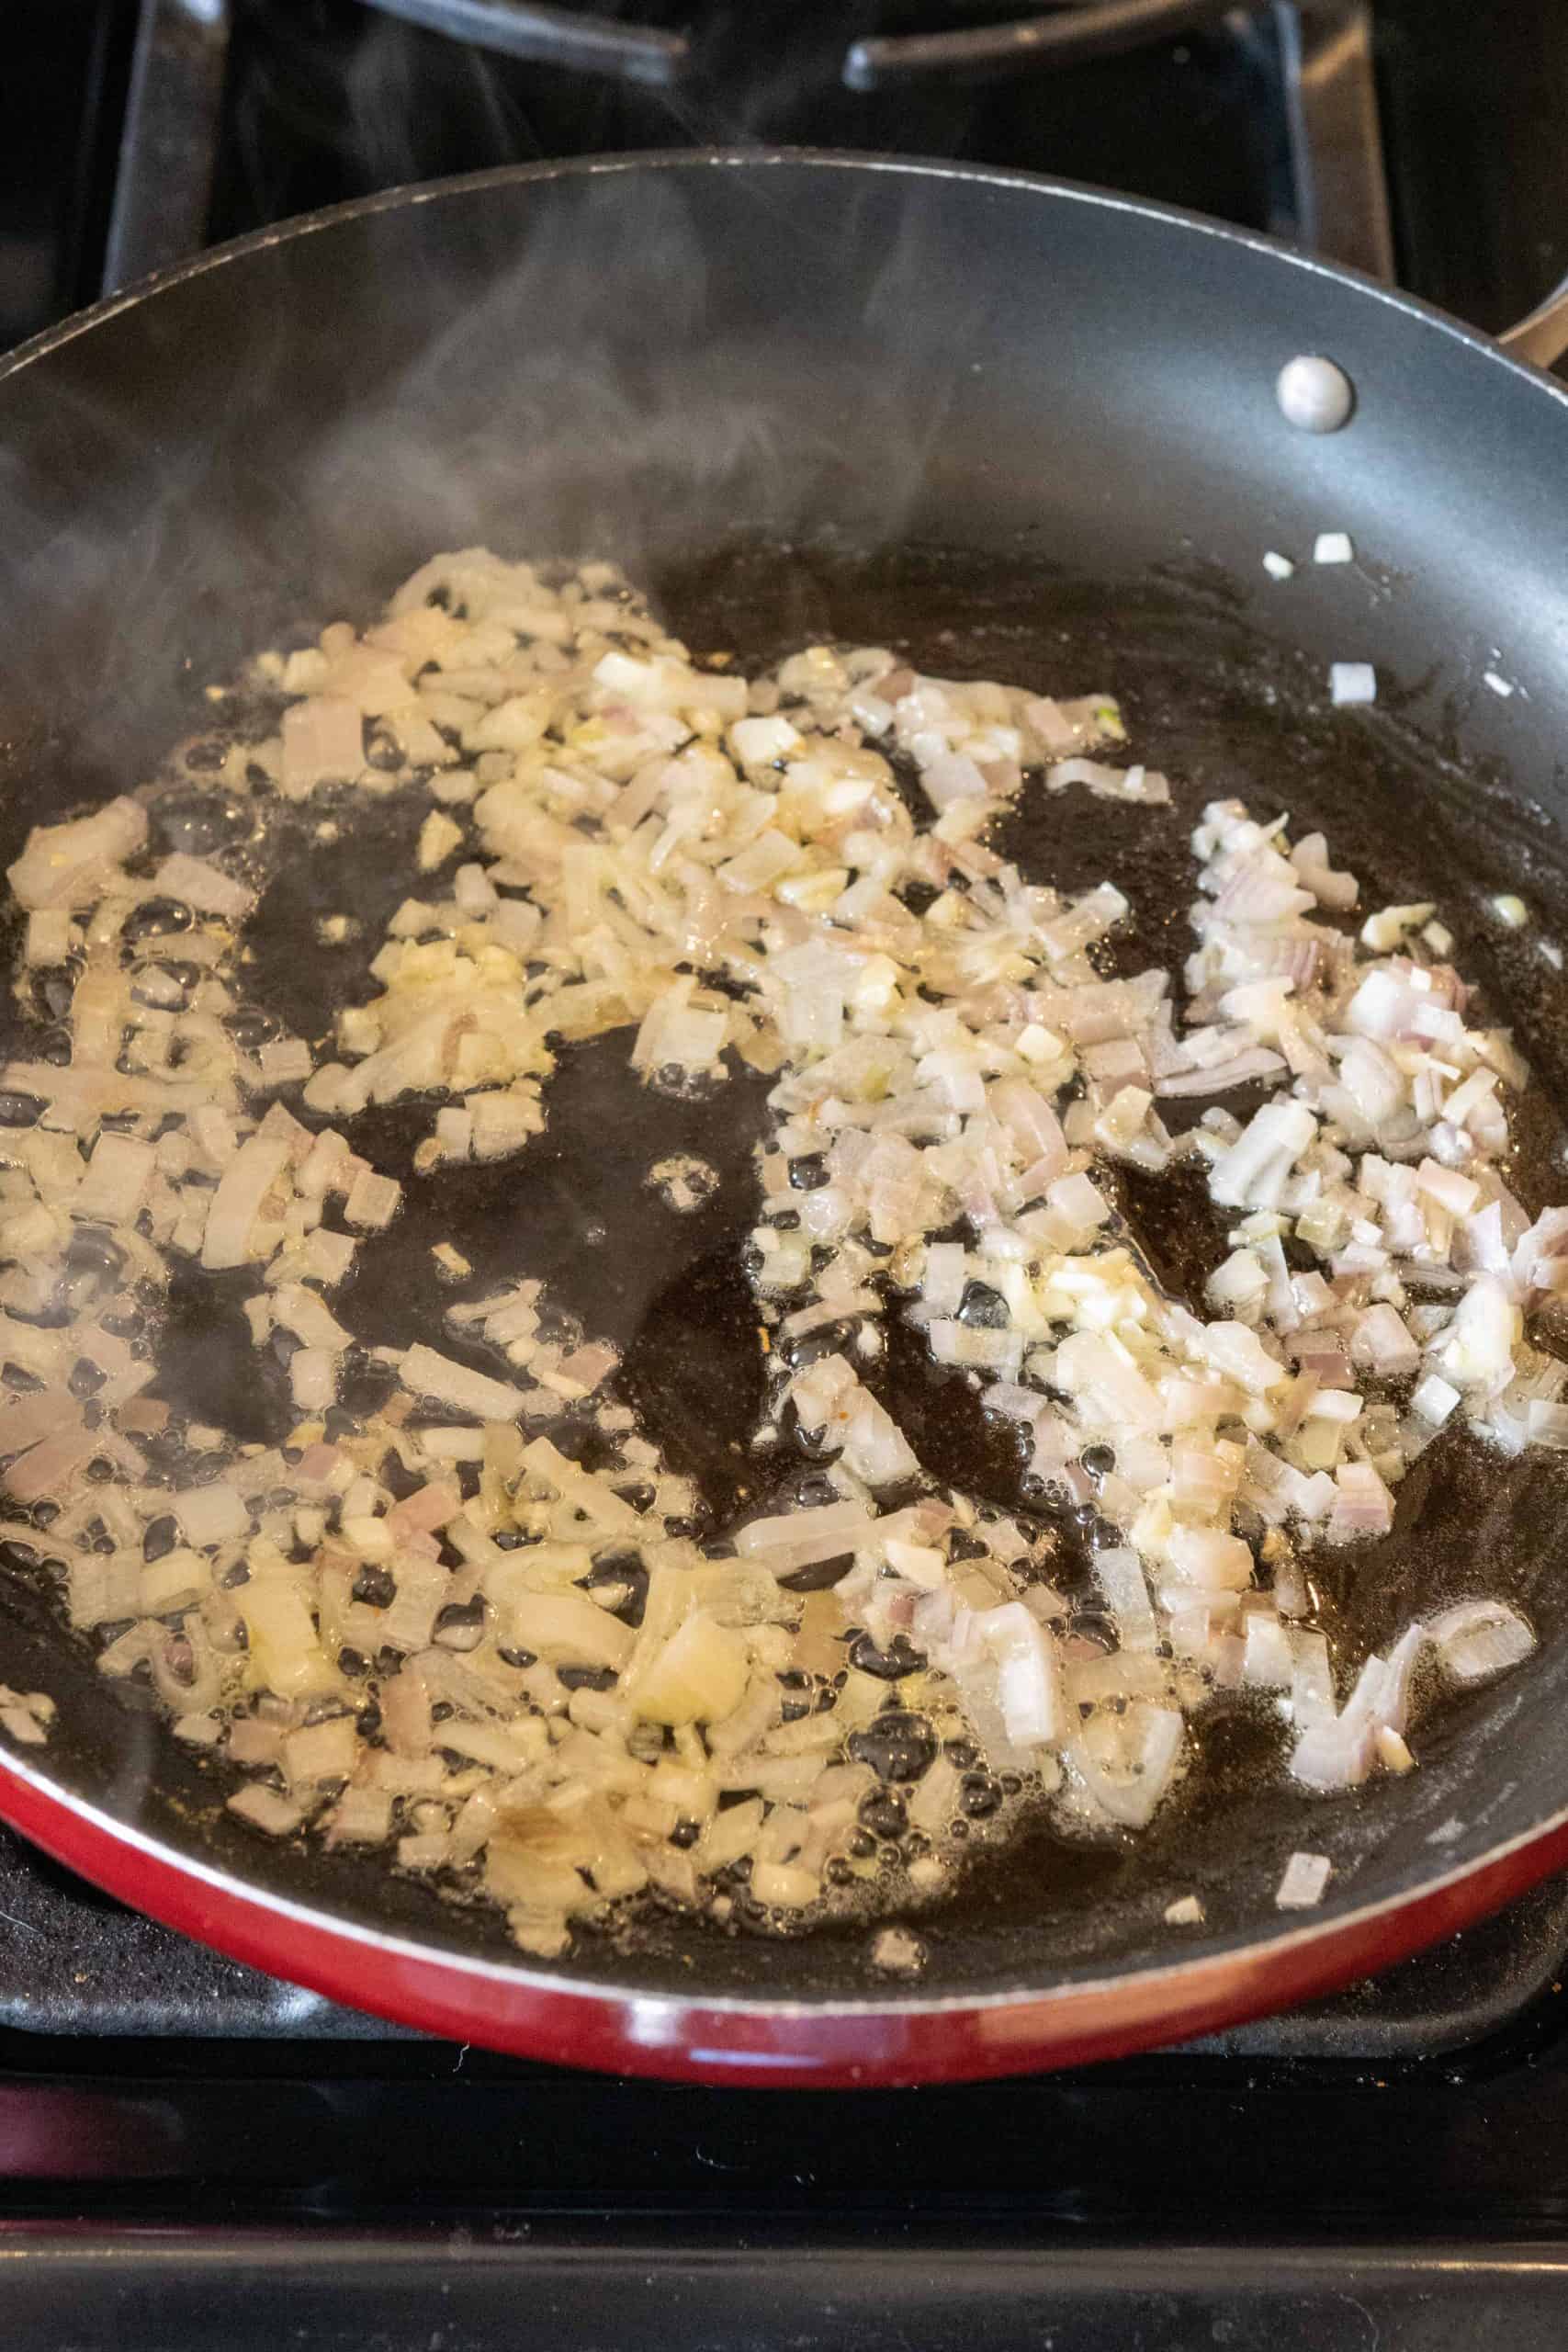 Cooking onion and shallots